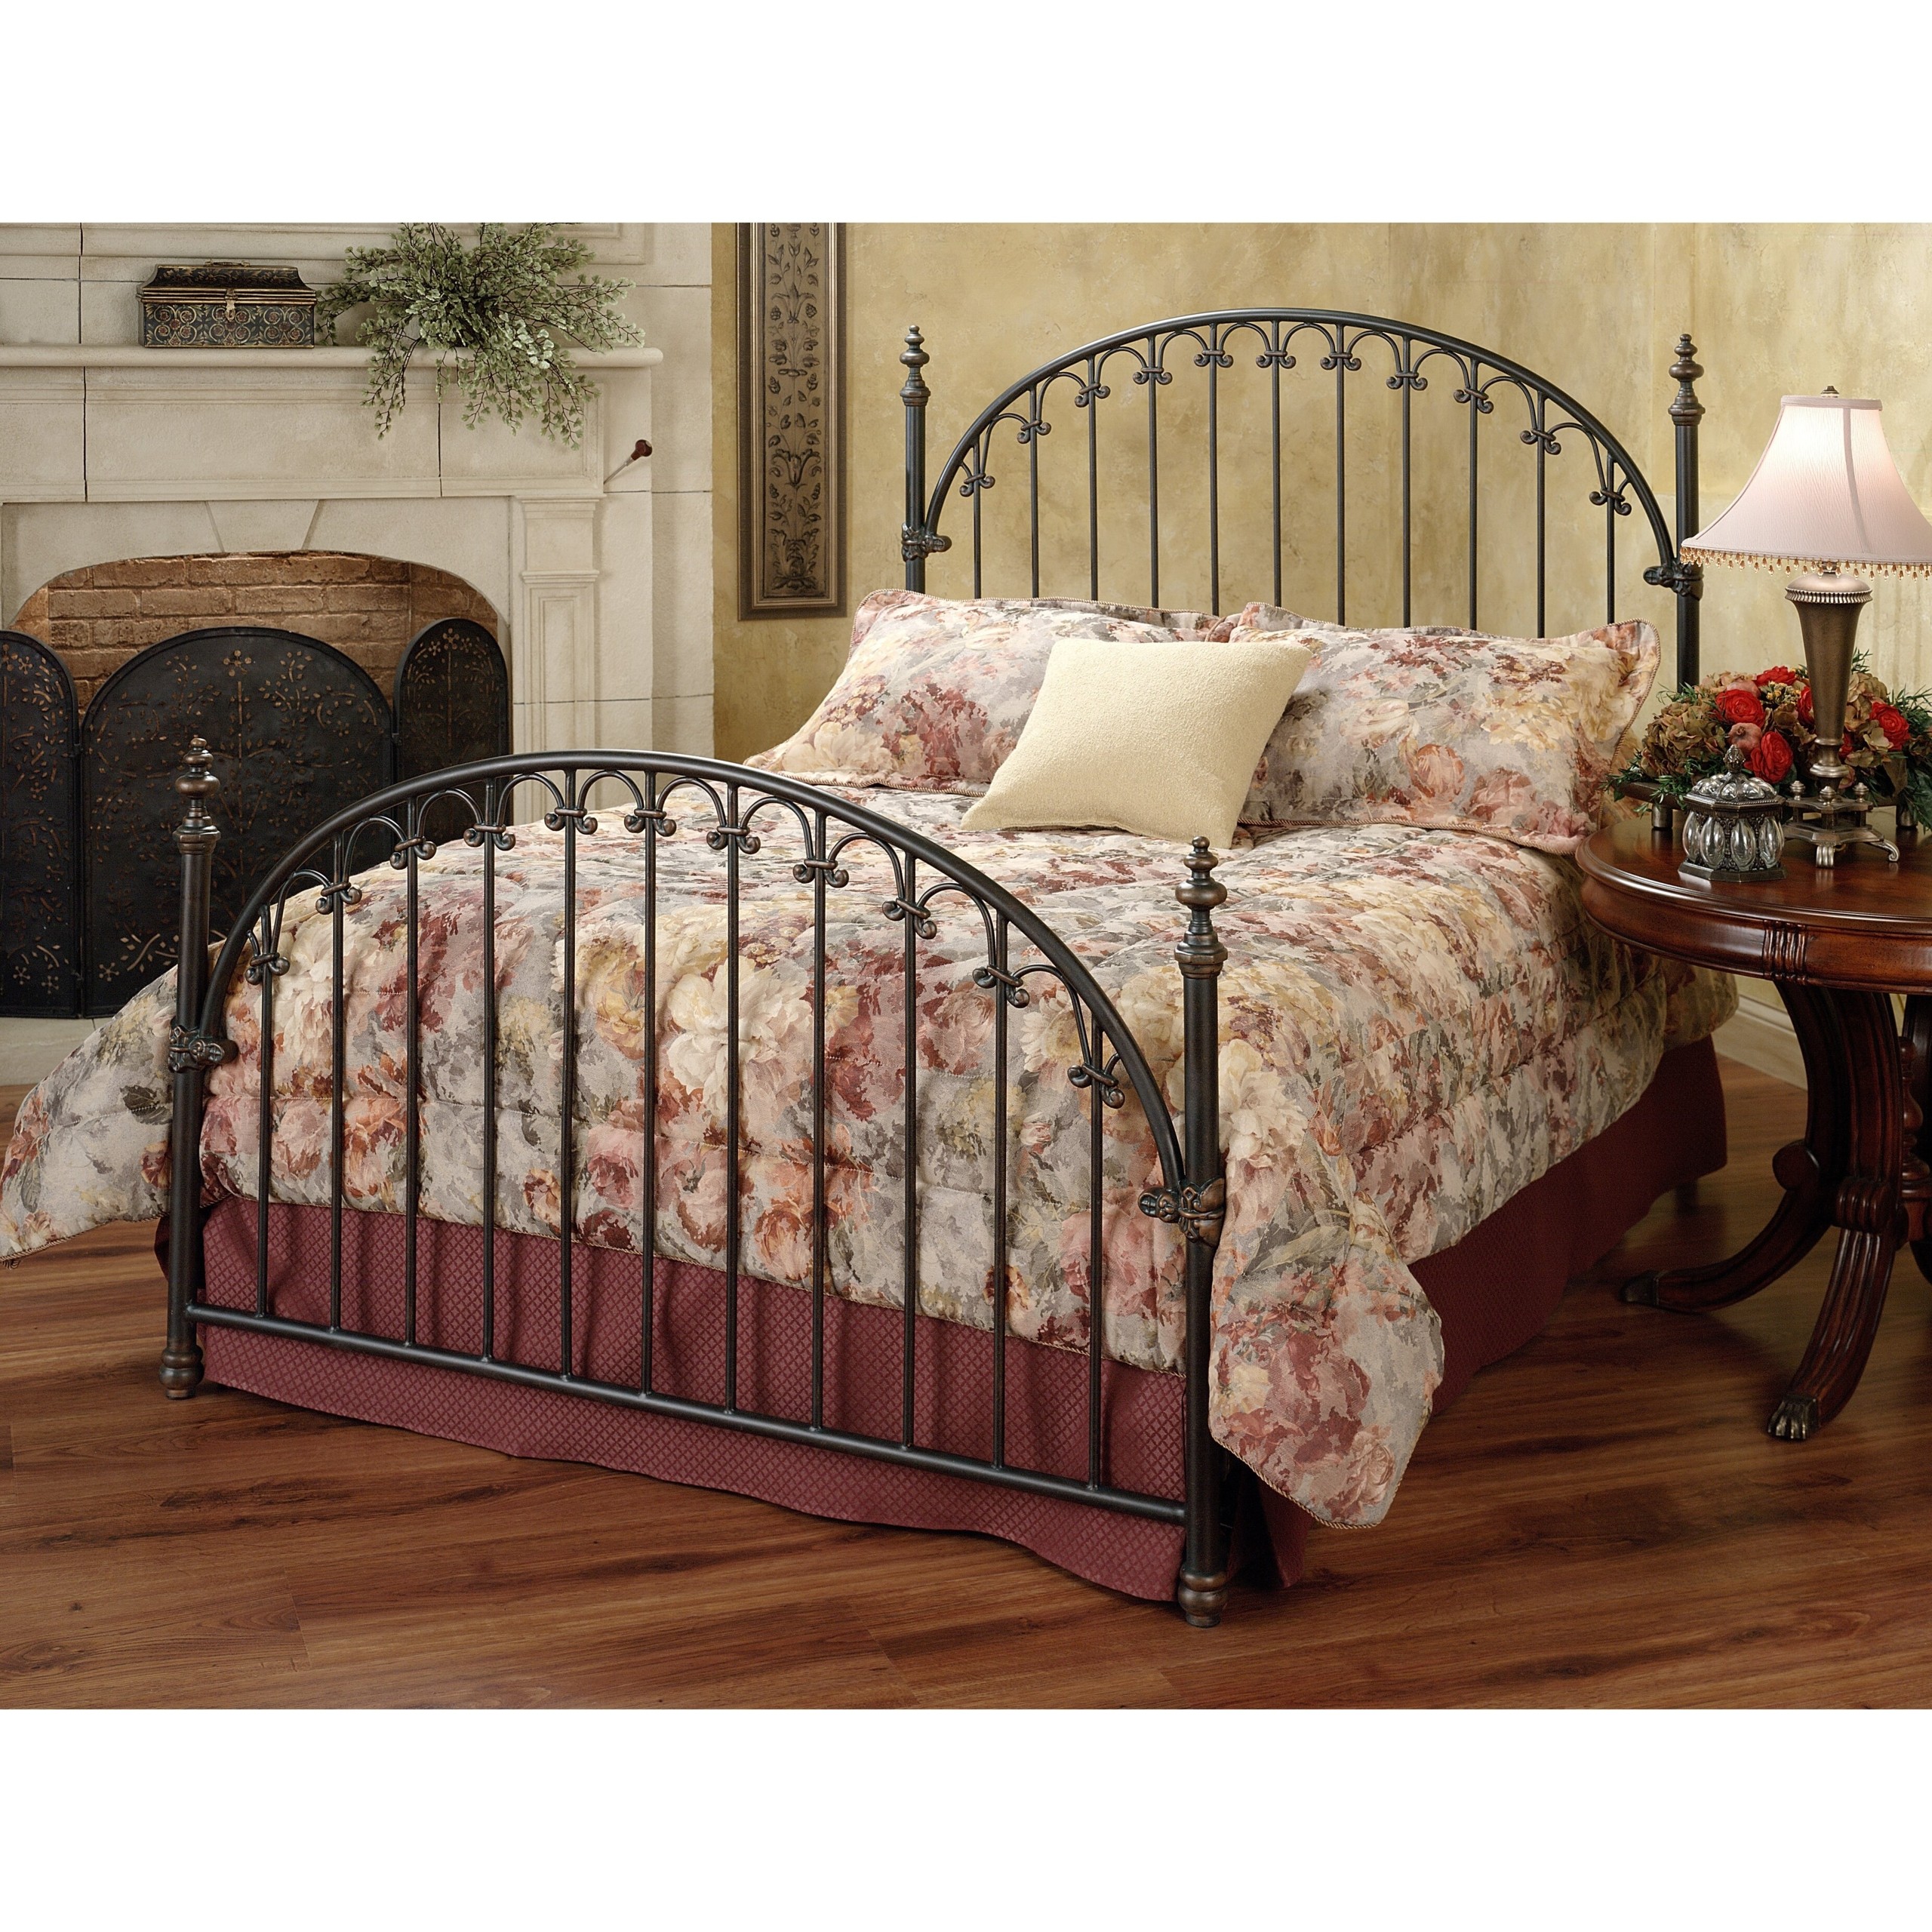 Hillsdale iron beds 30